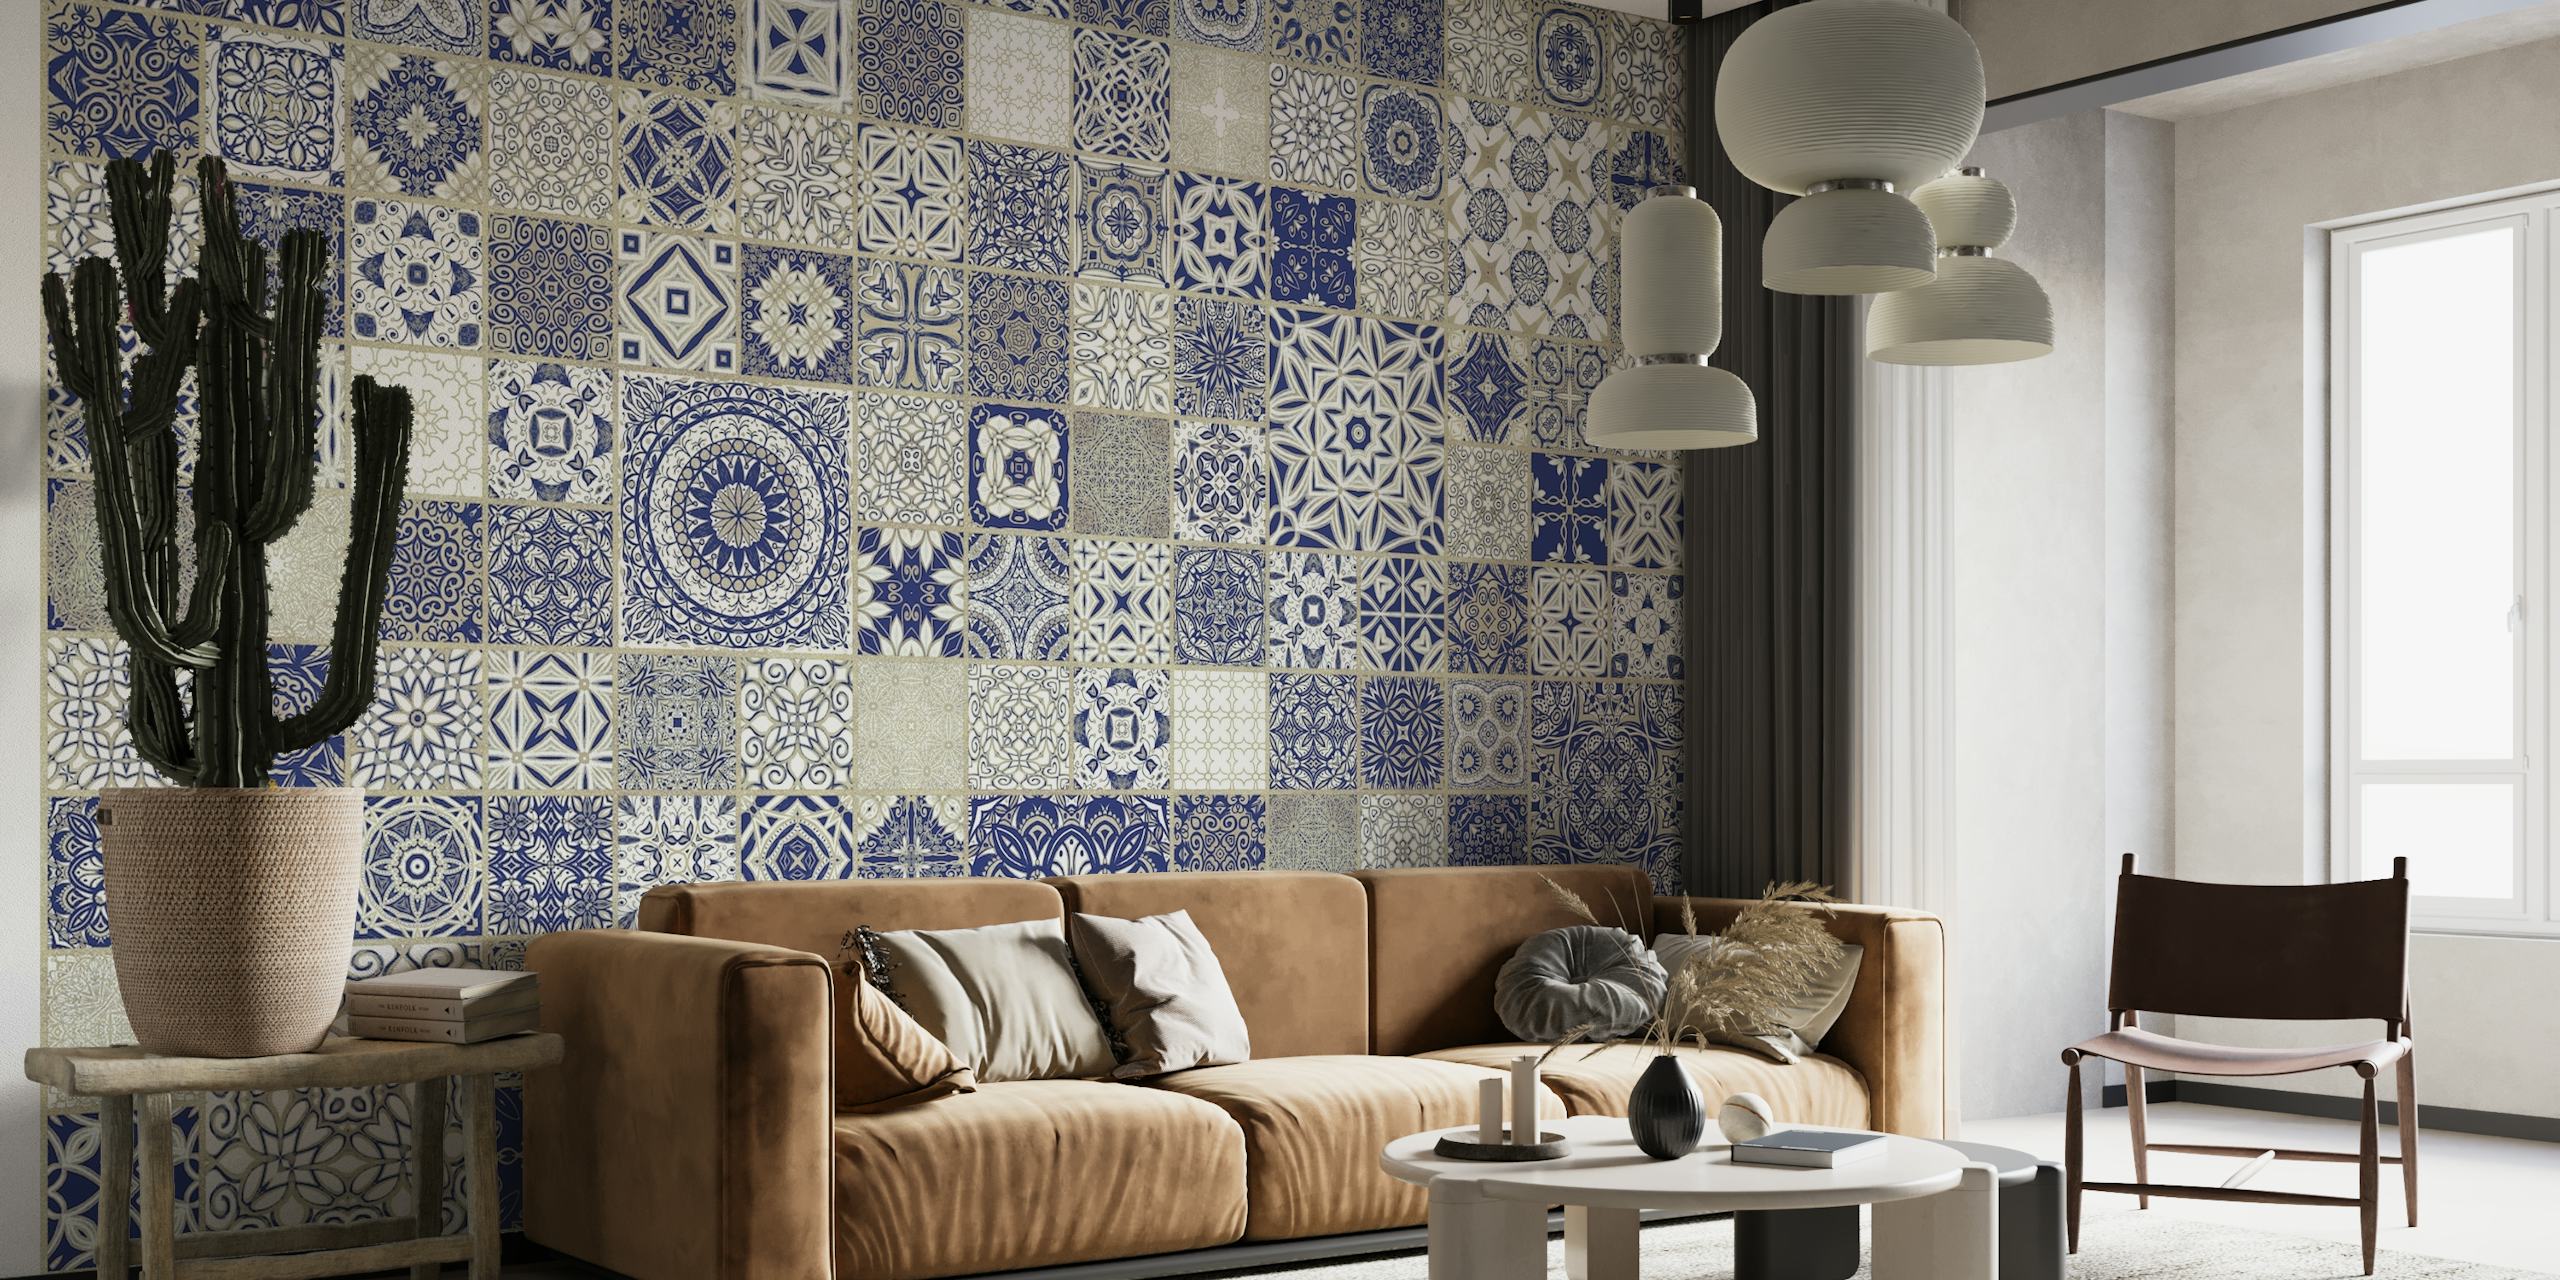 Vintage blue and beige patterned tiles wall mural